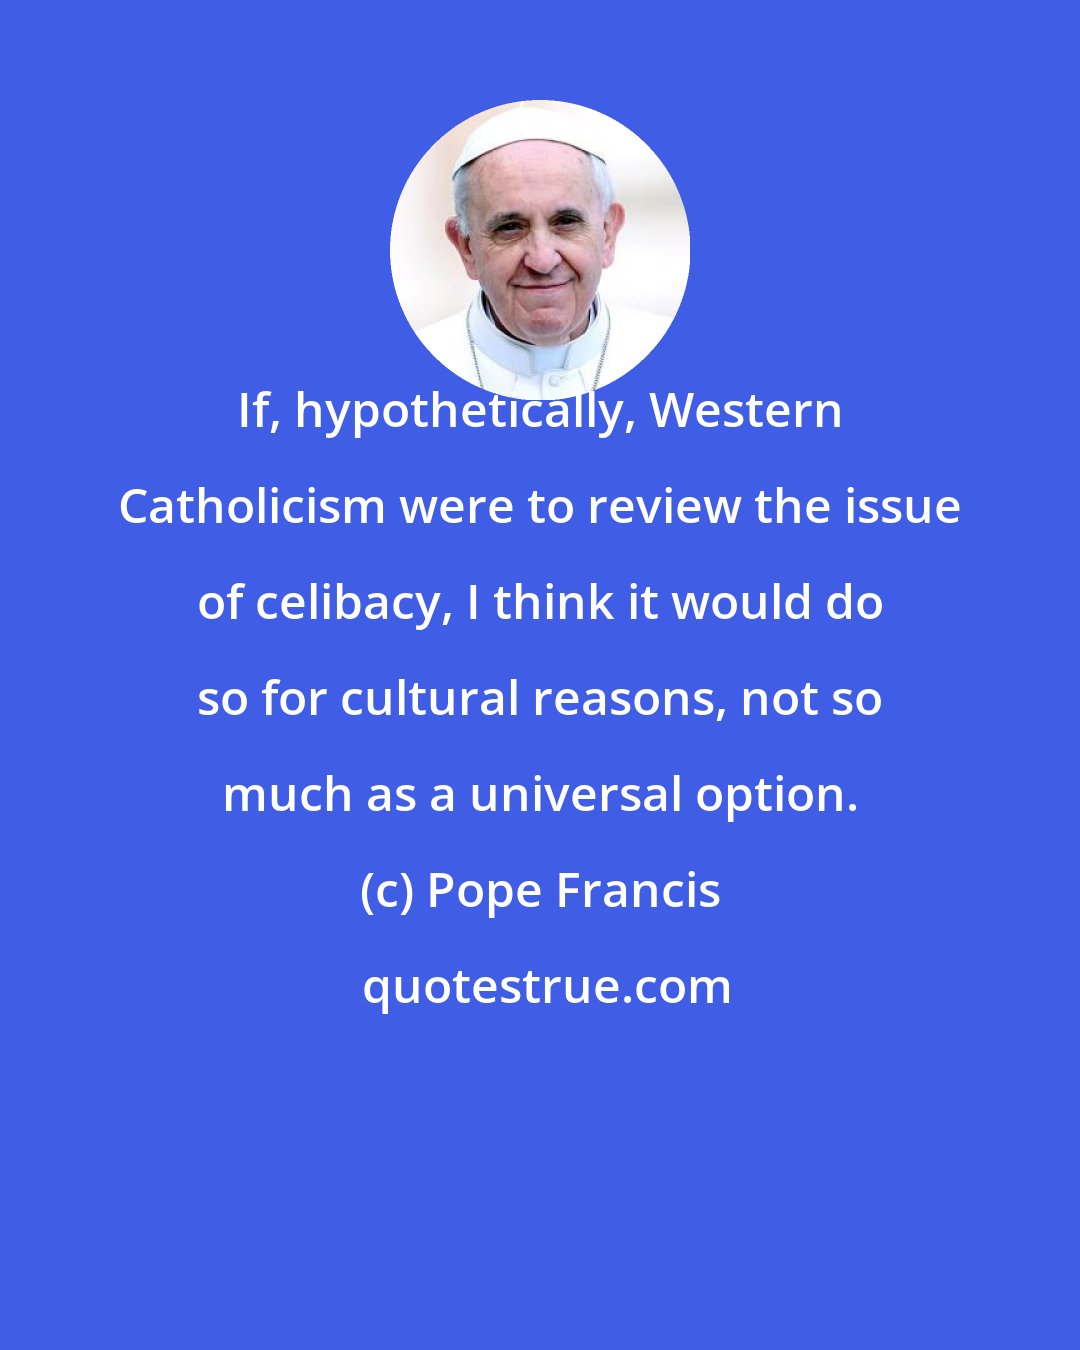 Pope Francis: If, hypothetically, Western Catholicism were to review the issue of celibacy, I think it would do so for cultural reasons, not so much as a universal option.